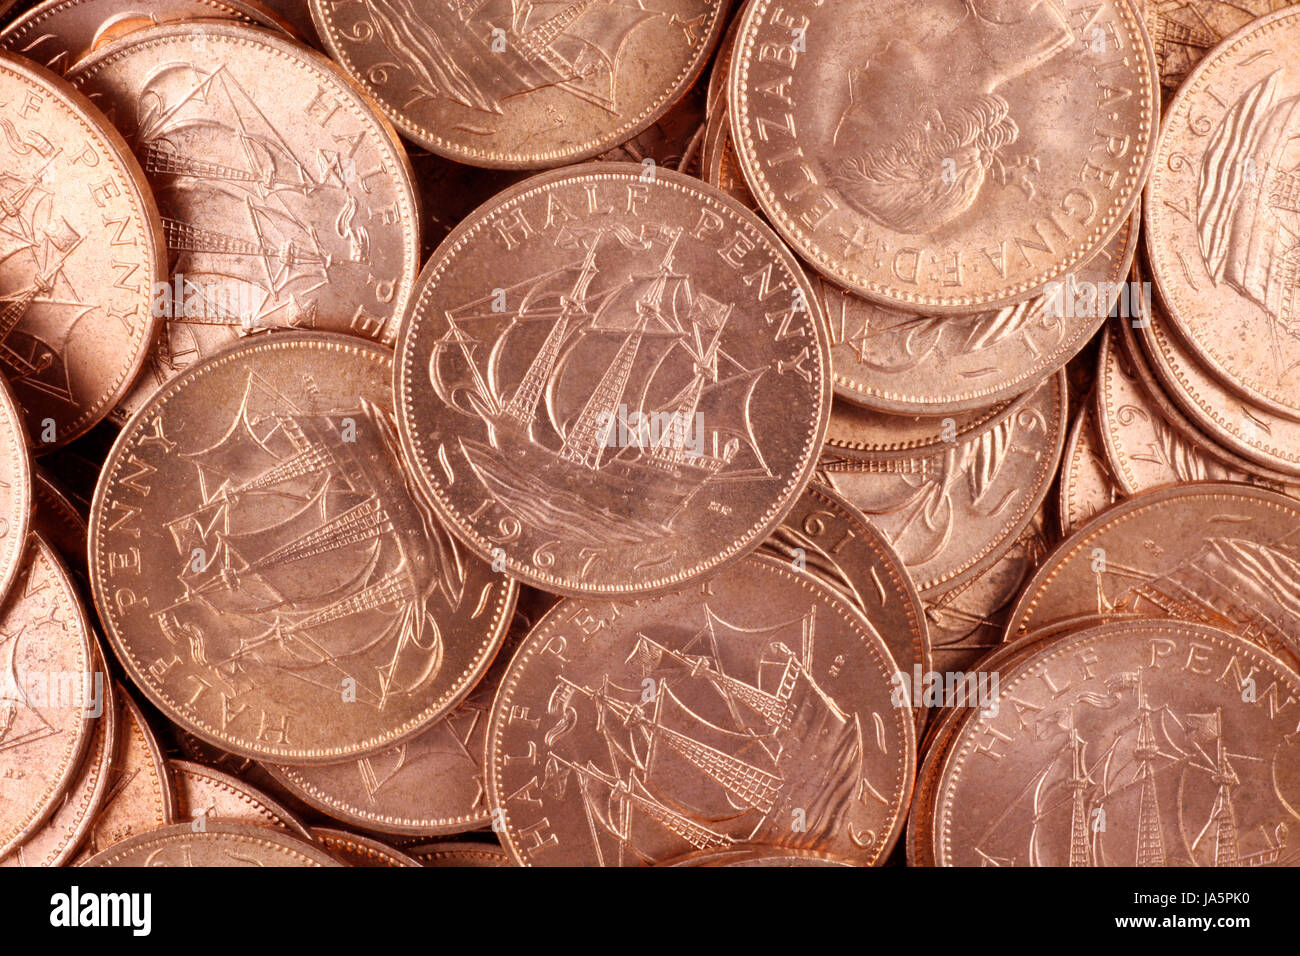 currency, new, metal, coins, bright, shiny, business dealings, deal, business Stock Photo